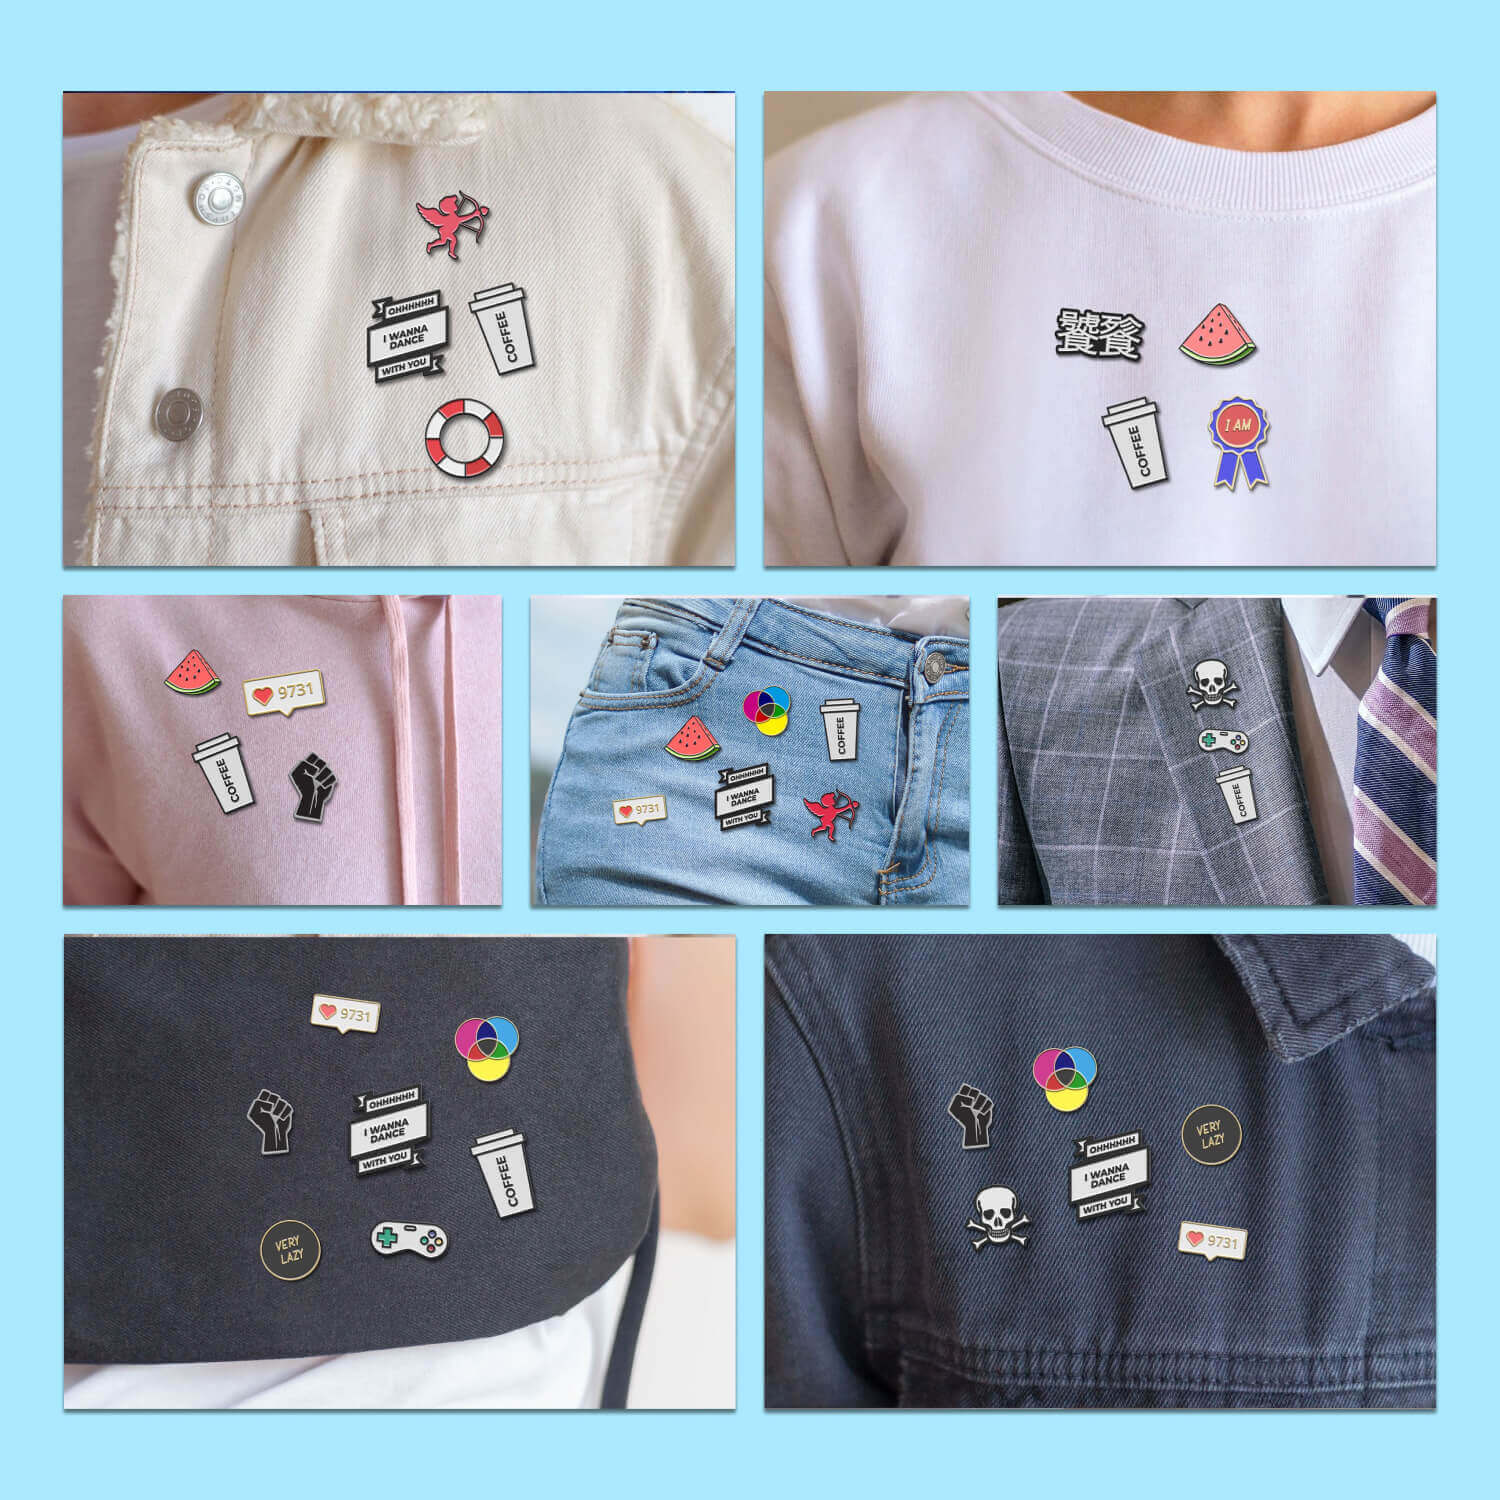 Enamel pin on the clothes of casual style.